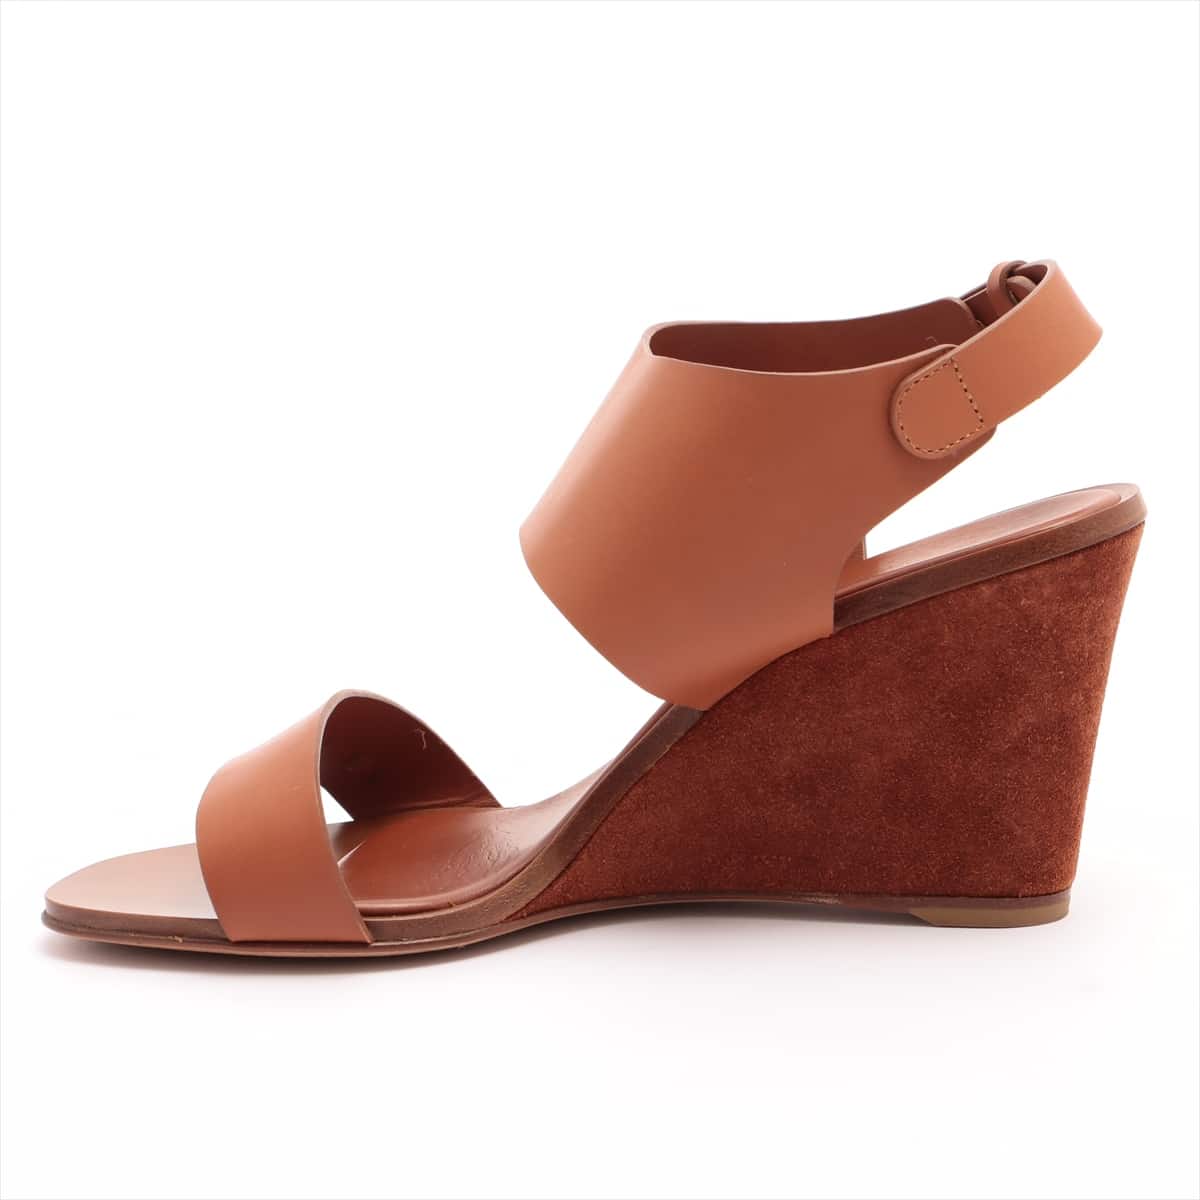 Sergio Rossi Leather Wedge Sole Sandals 35.5 Ladies' Brown